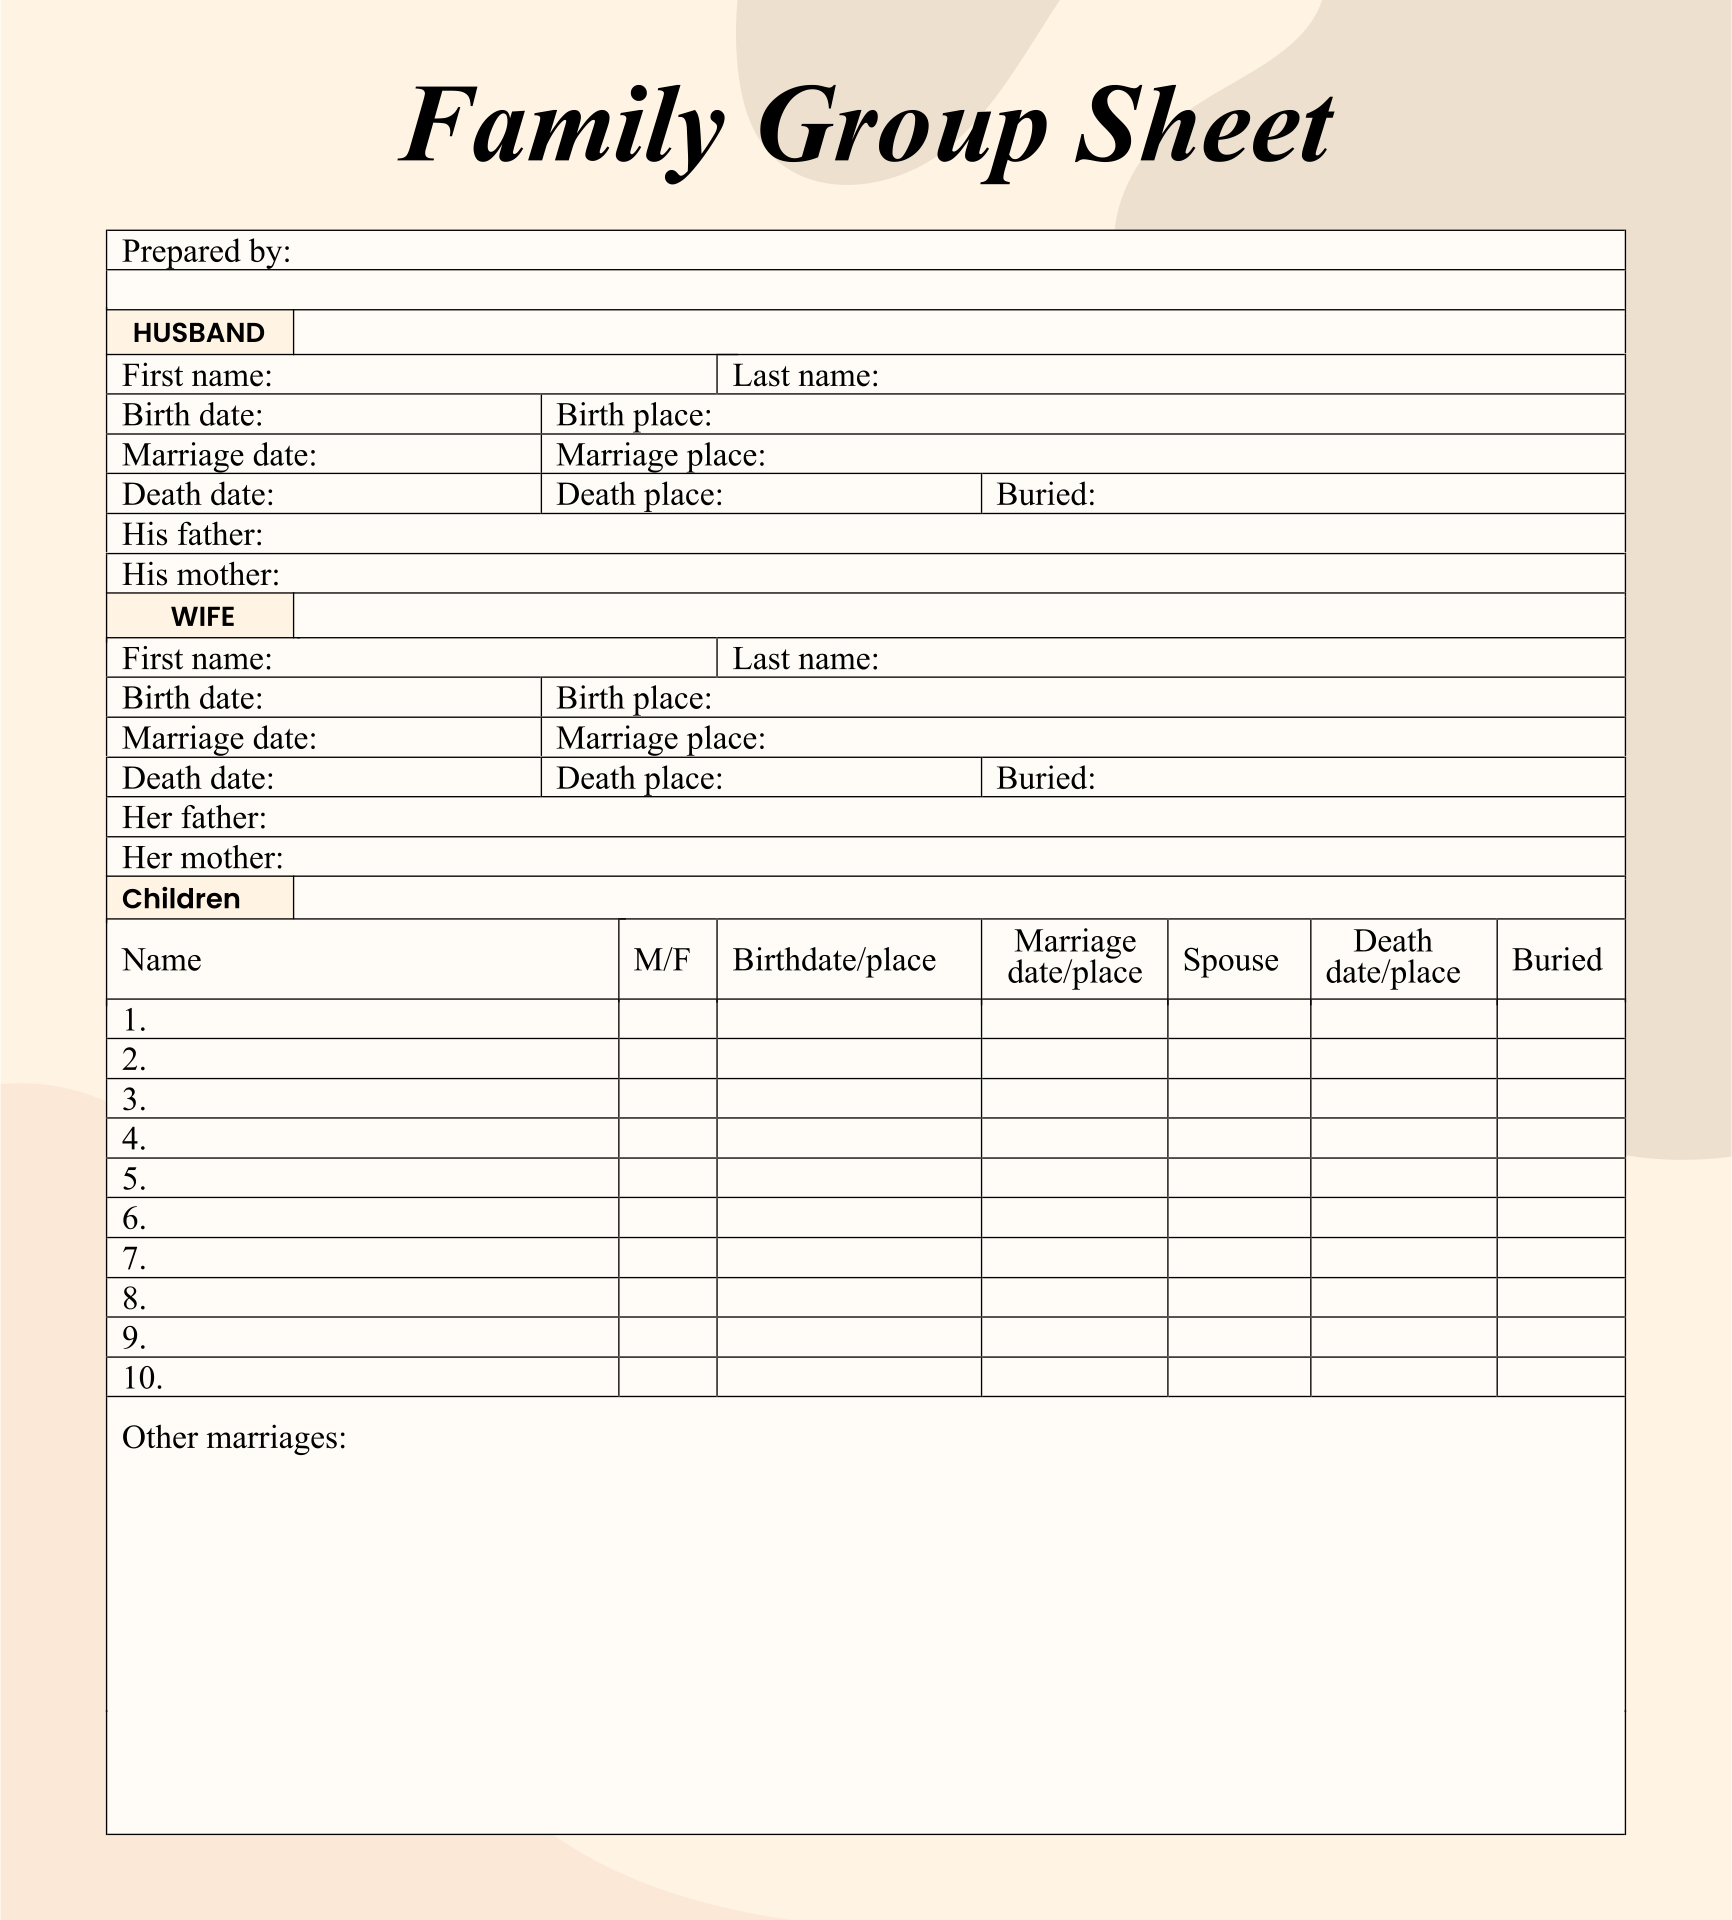 printable-family-group-record-form-printable-forms-free-online